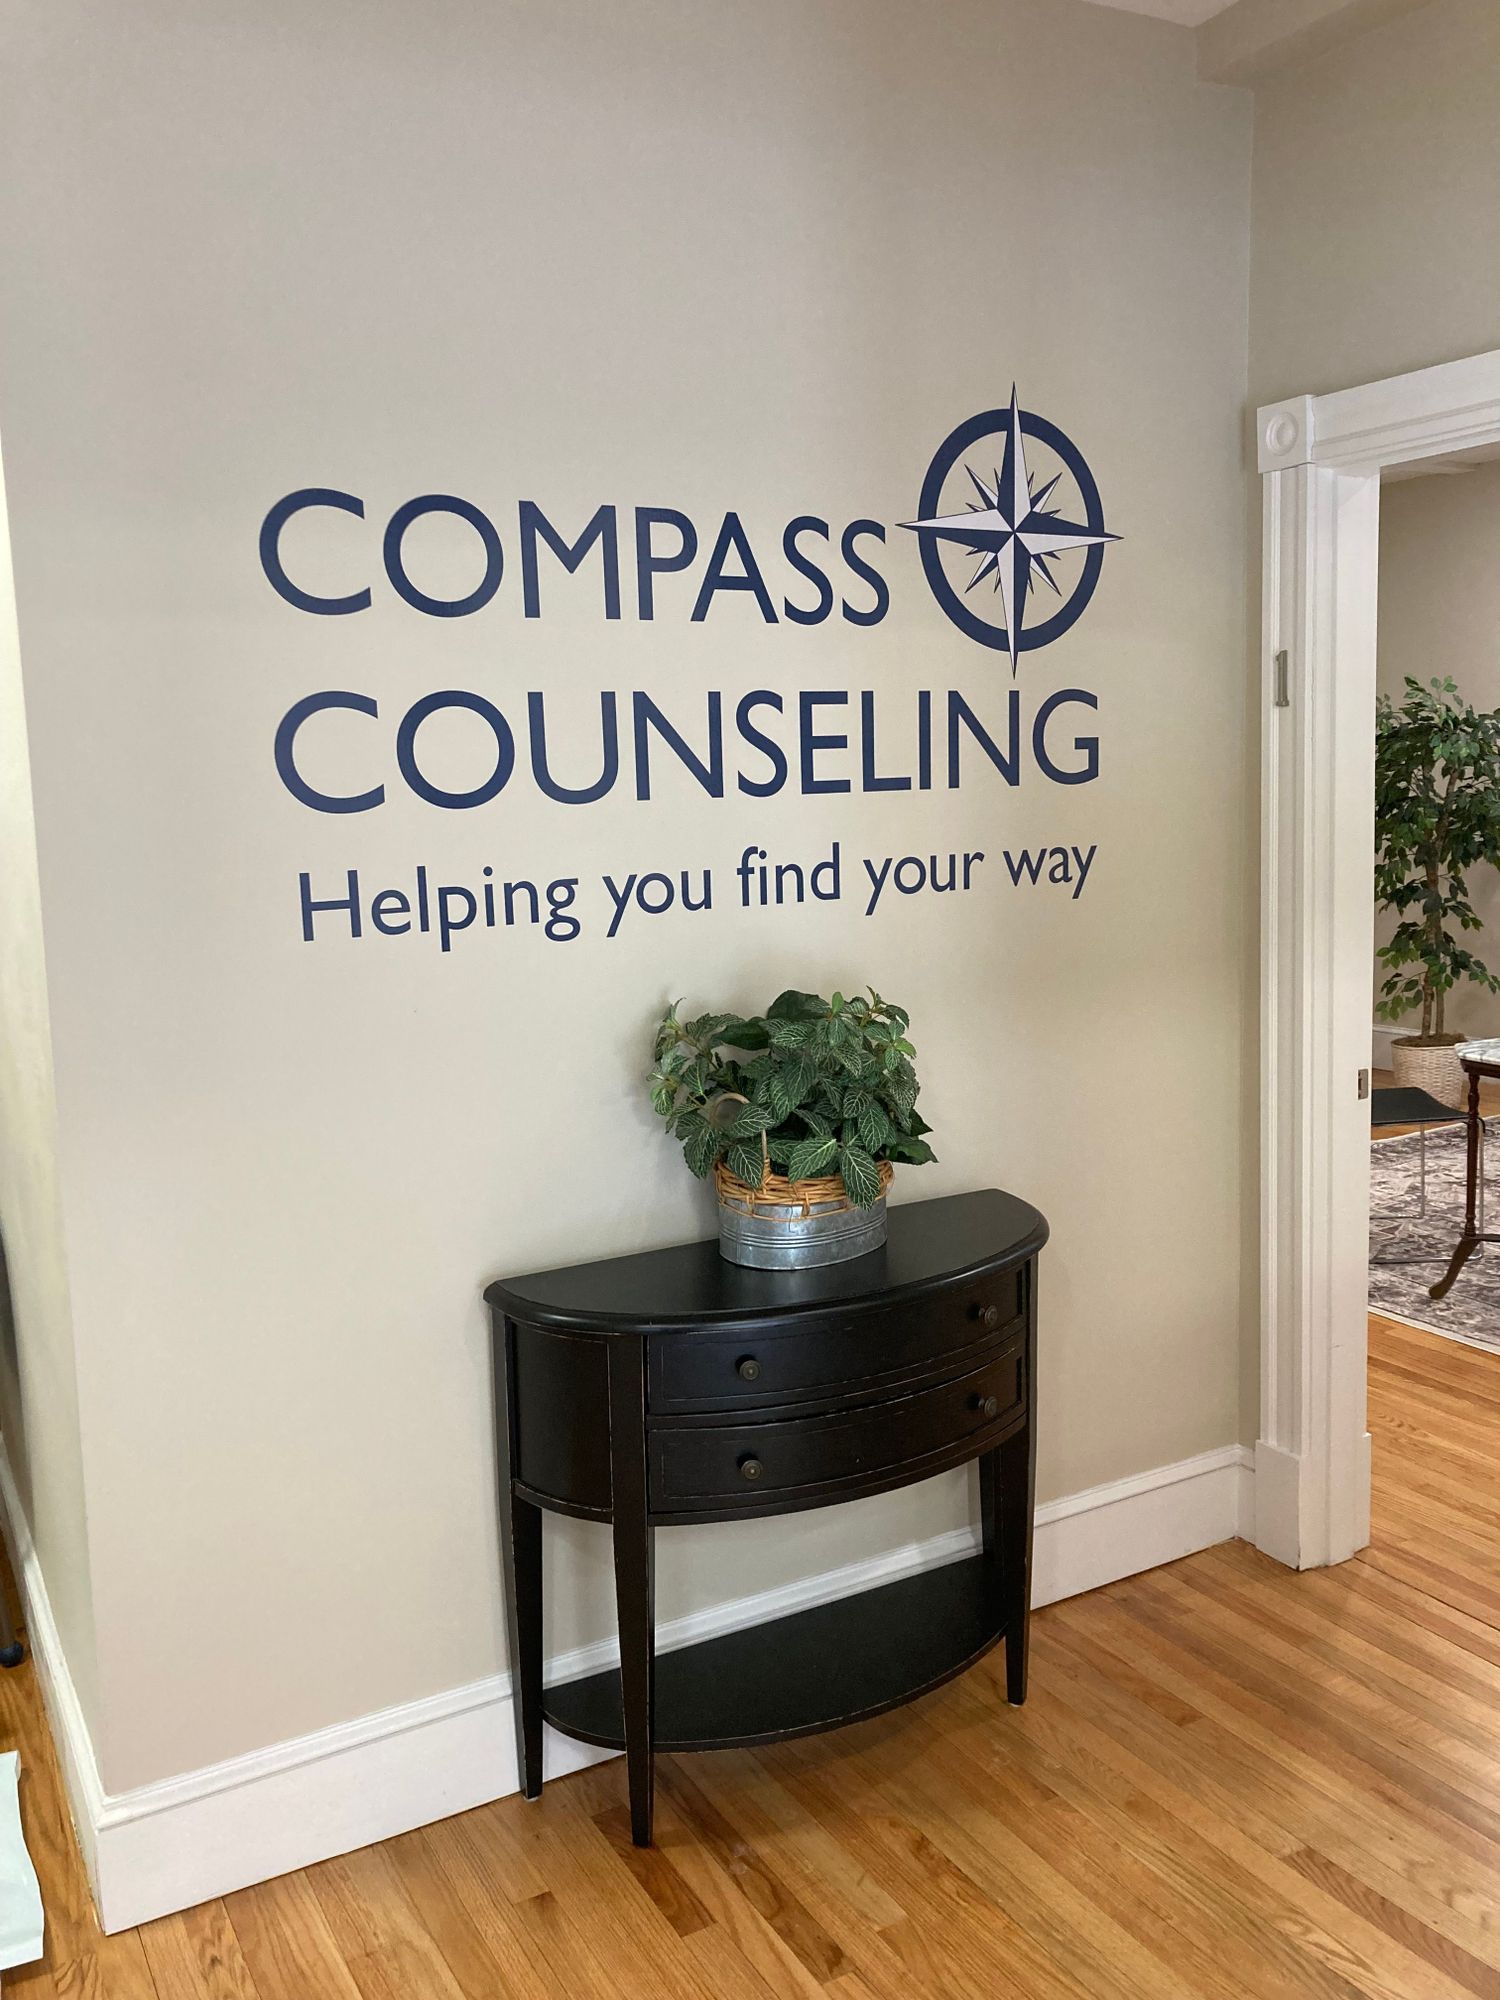 Gallery Photo of Welcome to Compass Counseling!